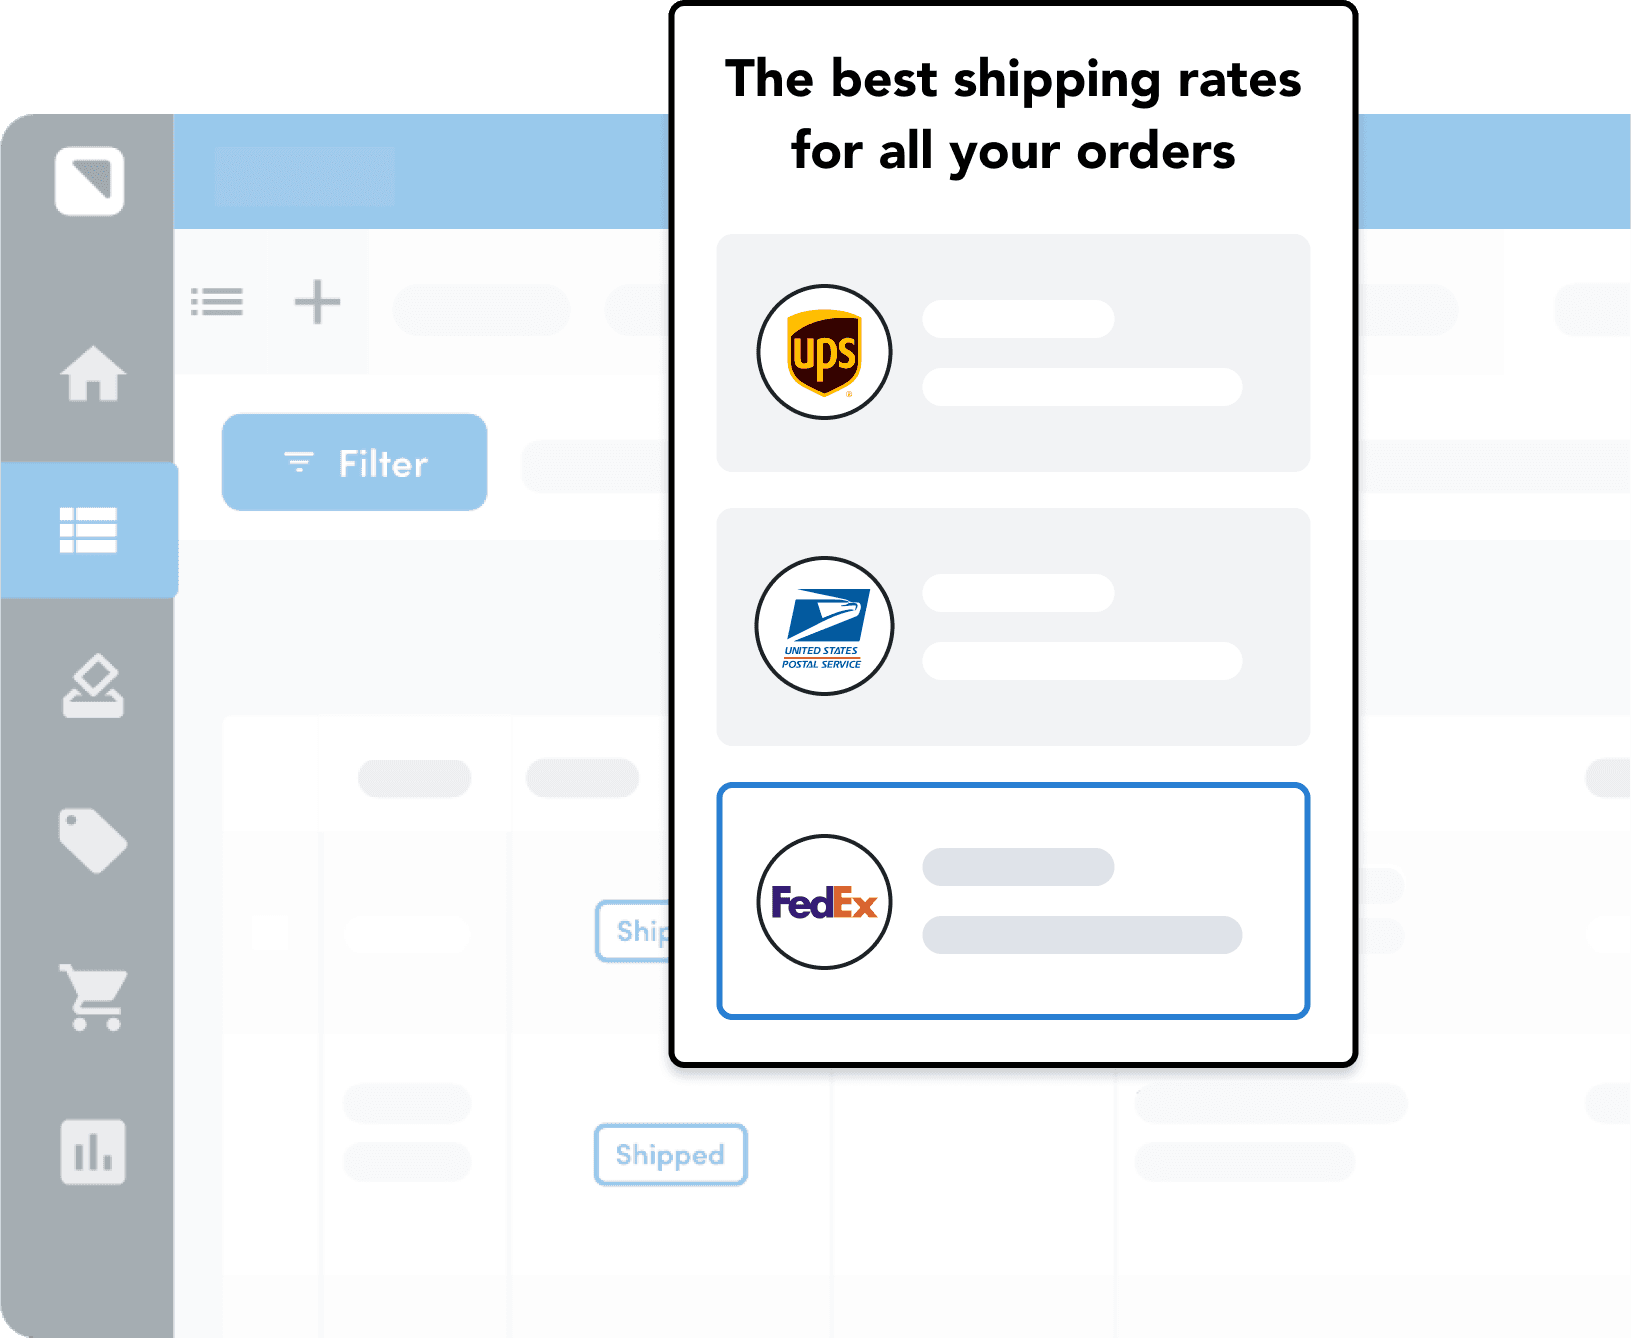 The best shipping rates for all your orders